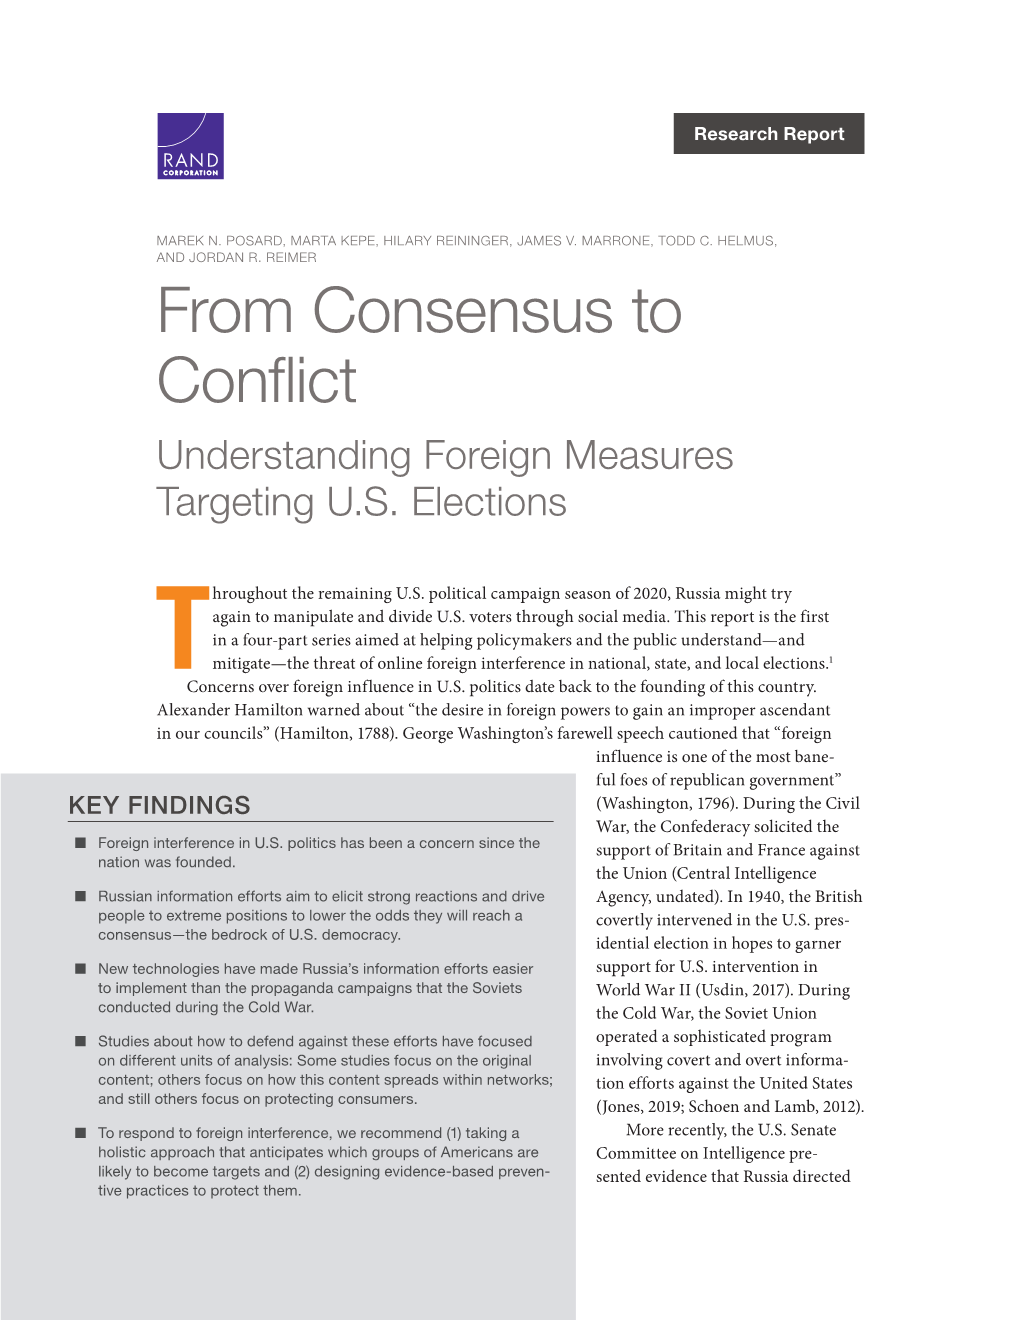 Understanding Foreign Measures Targeting US Elections